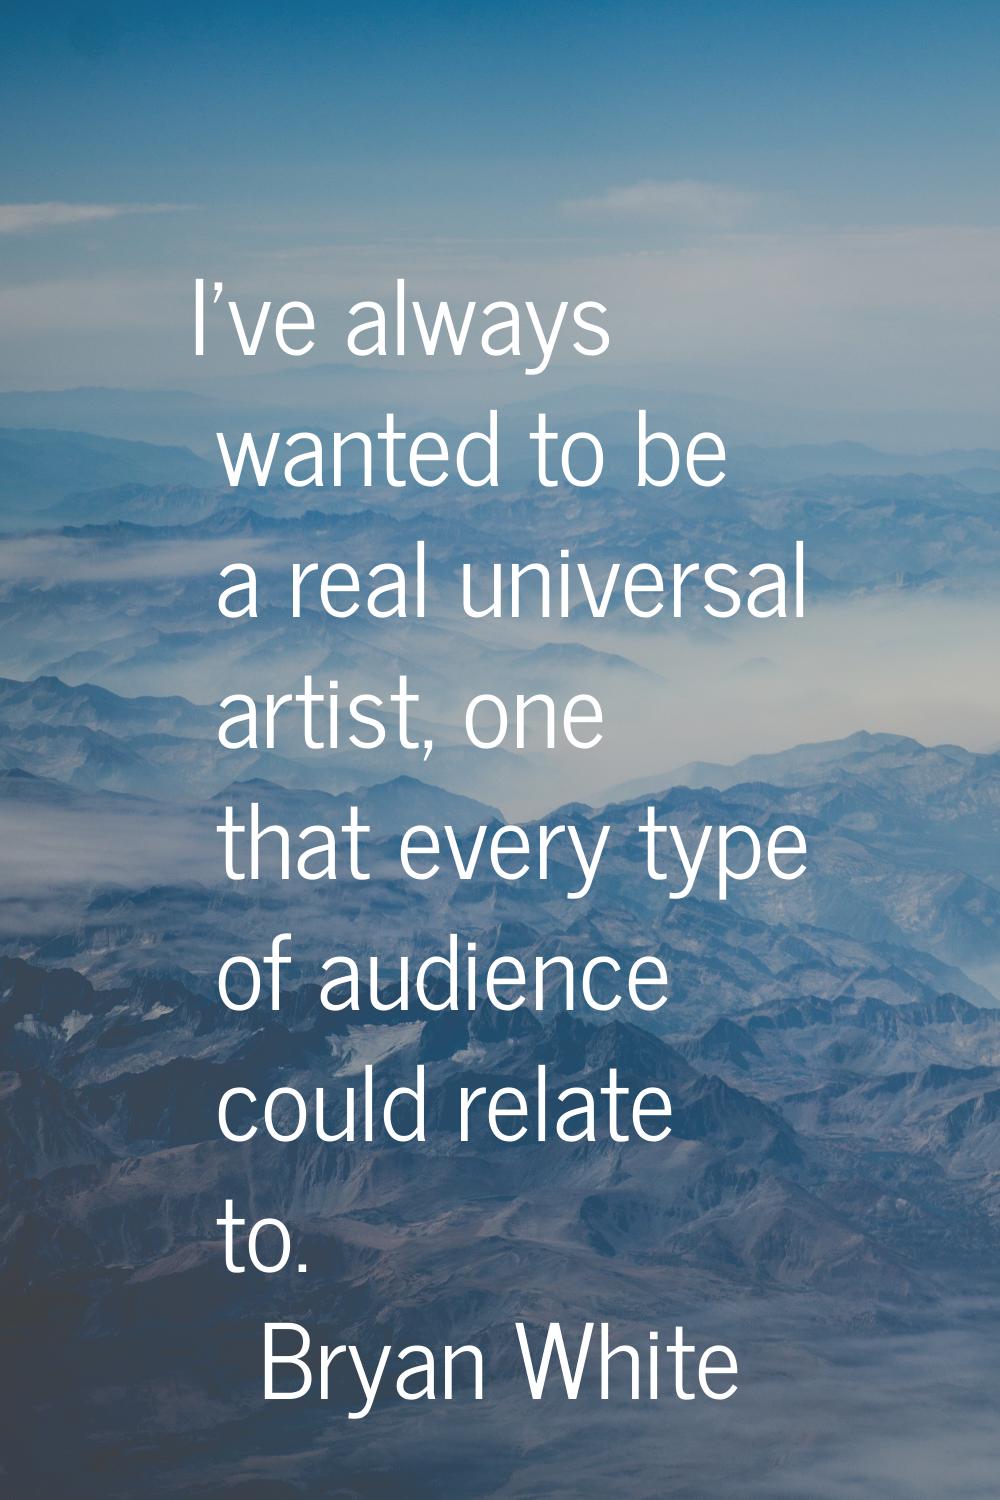 I've always wanted to be a real universal artist, one that every type of audience could relate to.